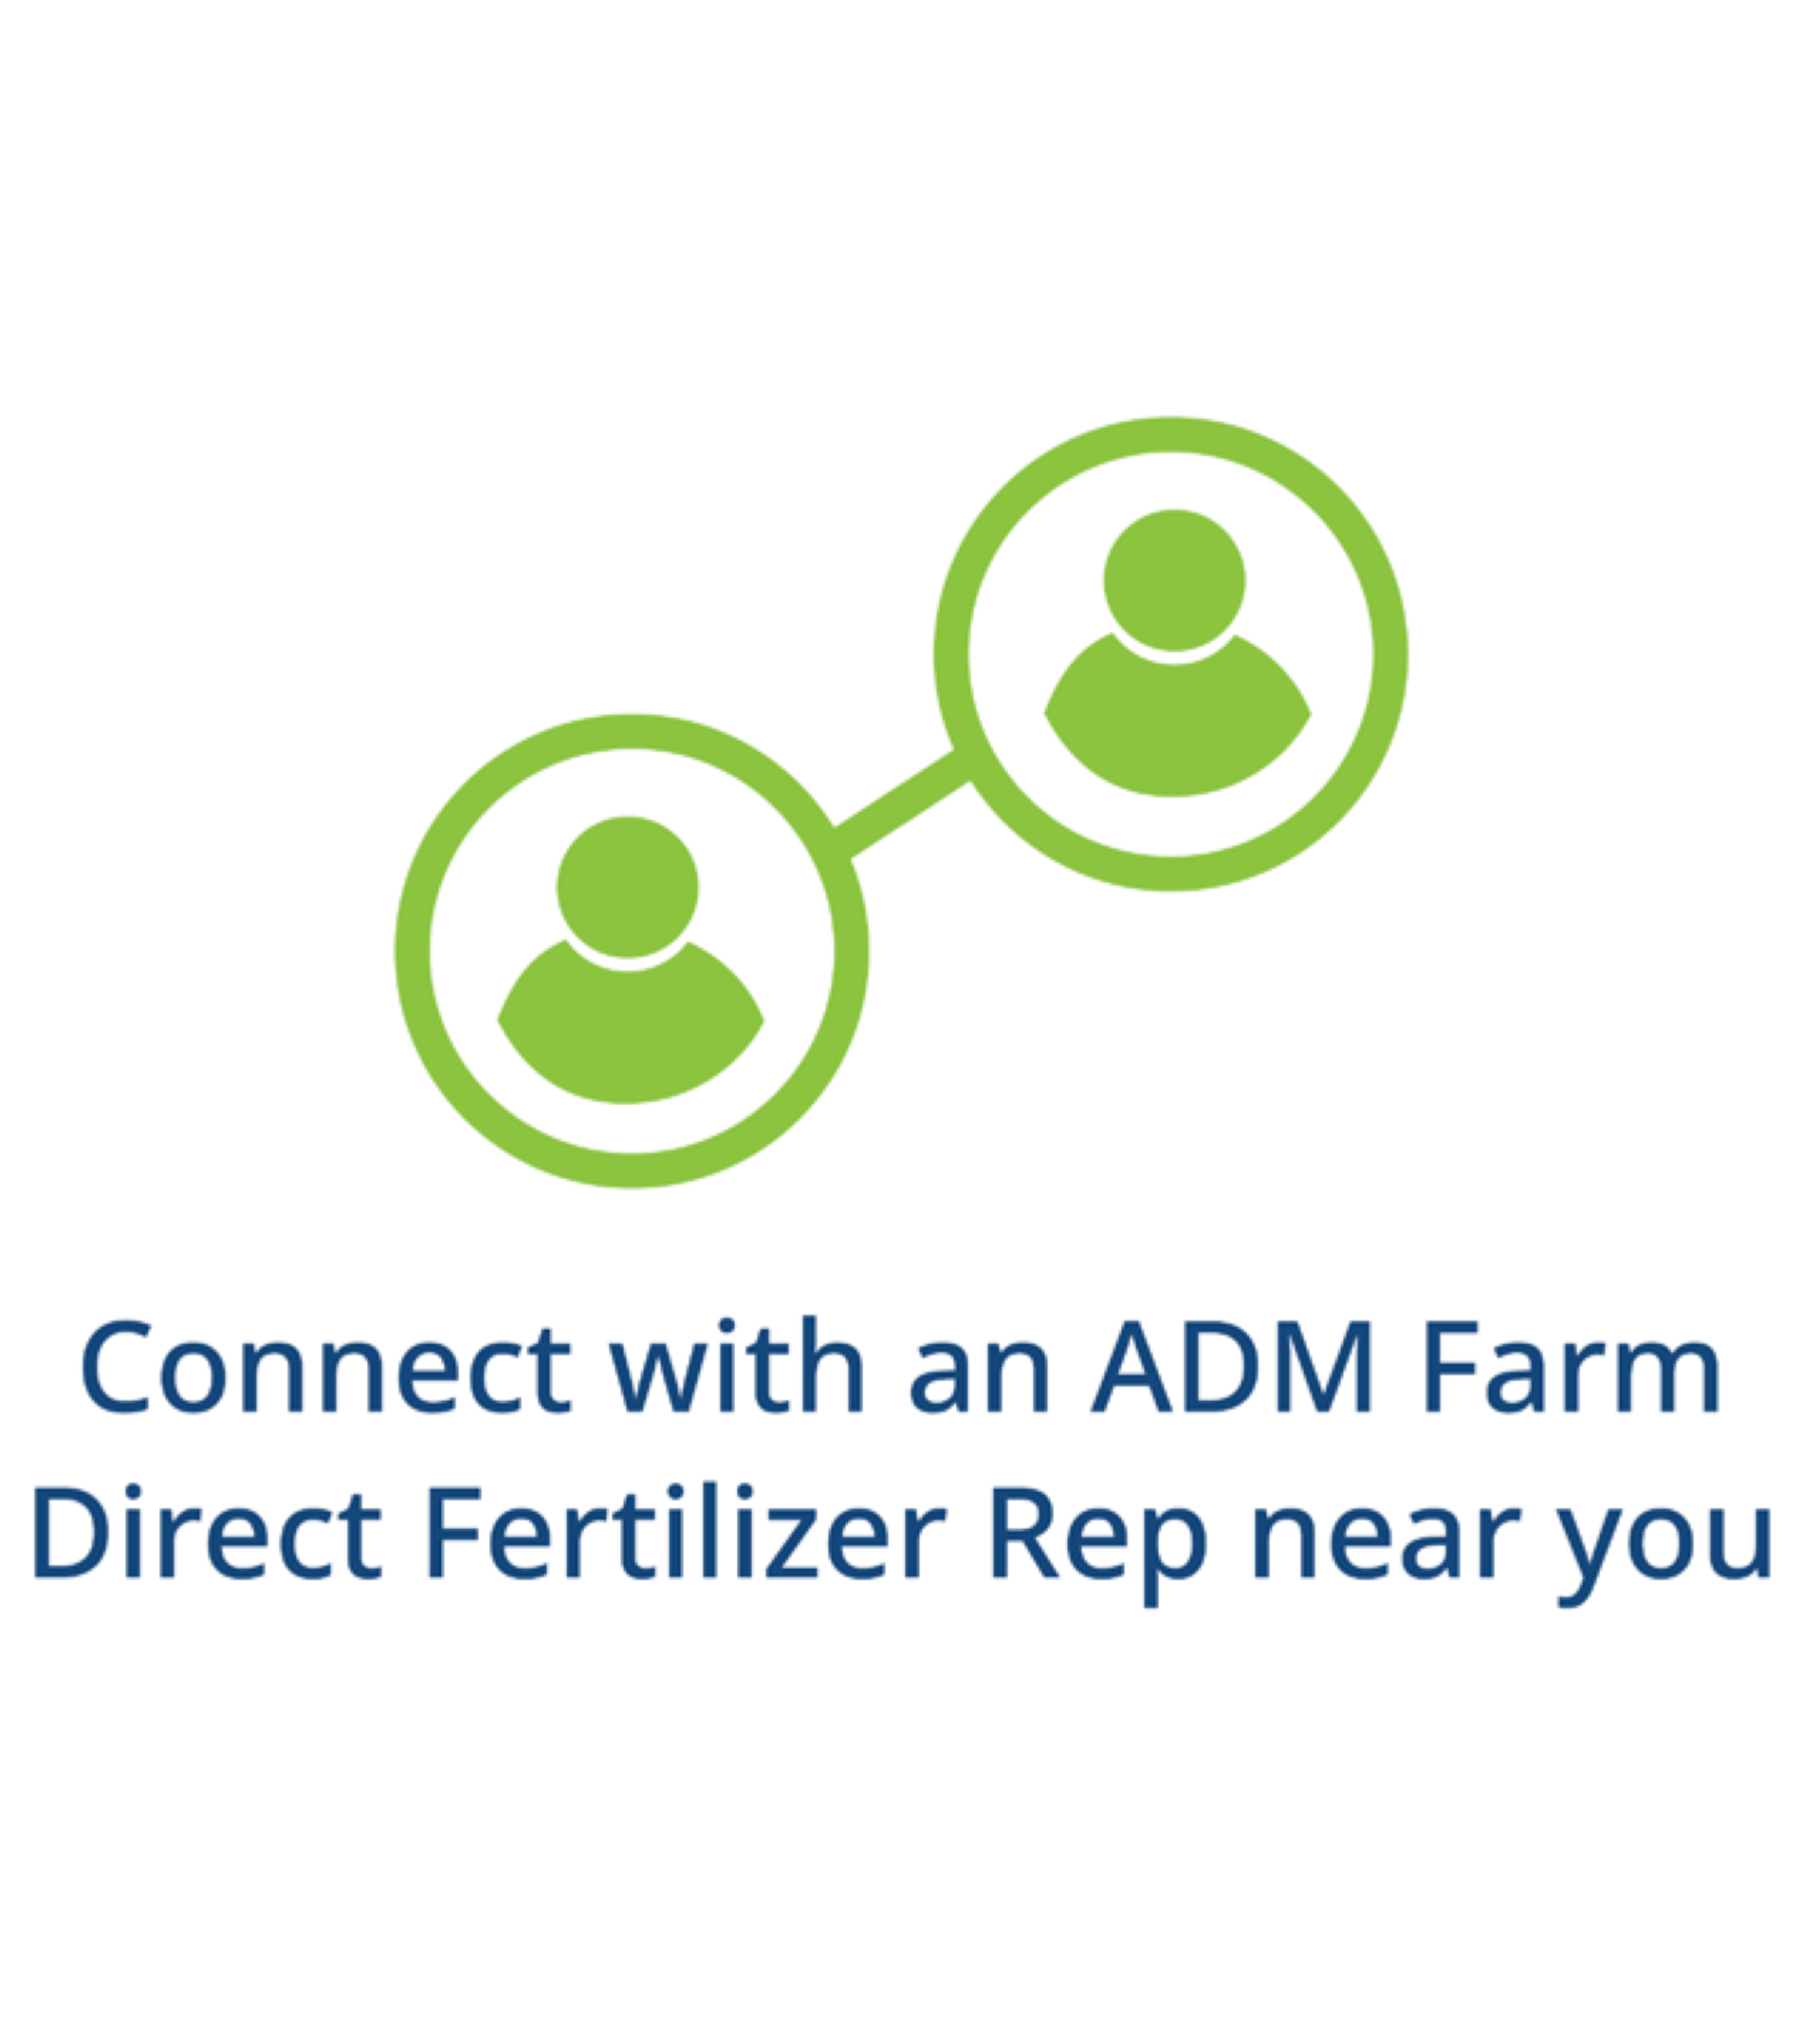 icons- connecting people - Connect with an ADM Farm Direct Fertilizer Rep near you